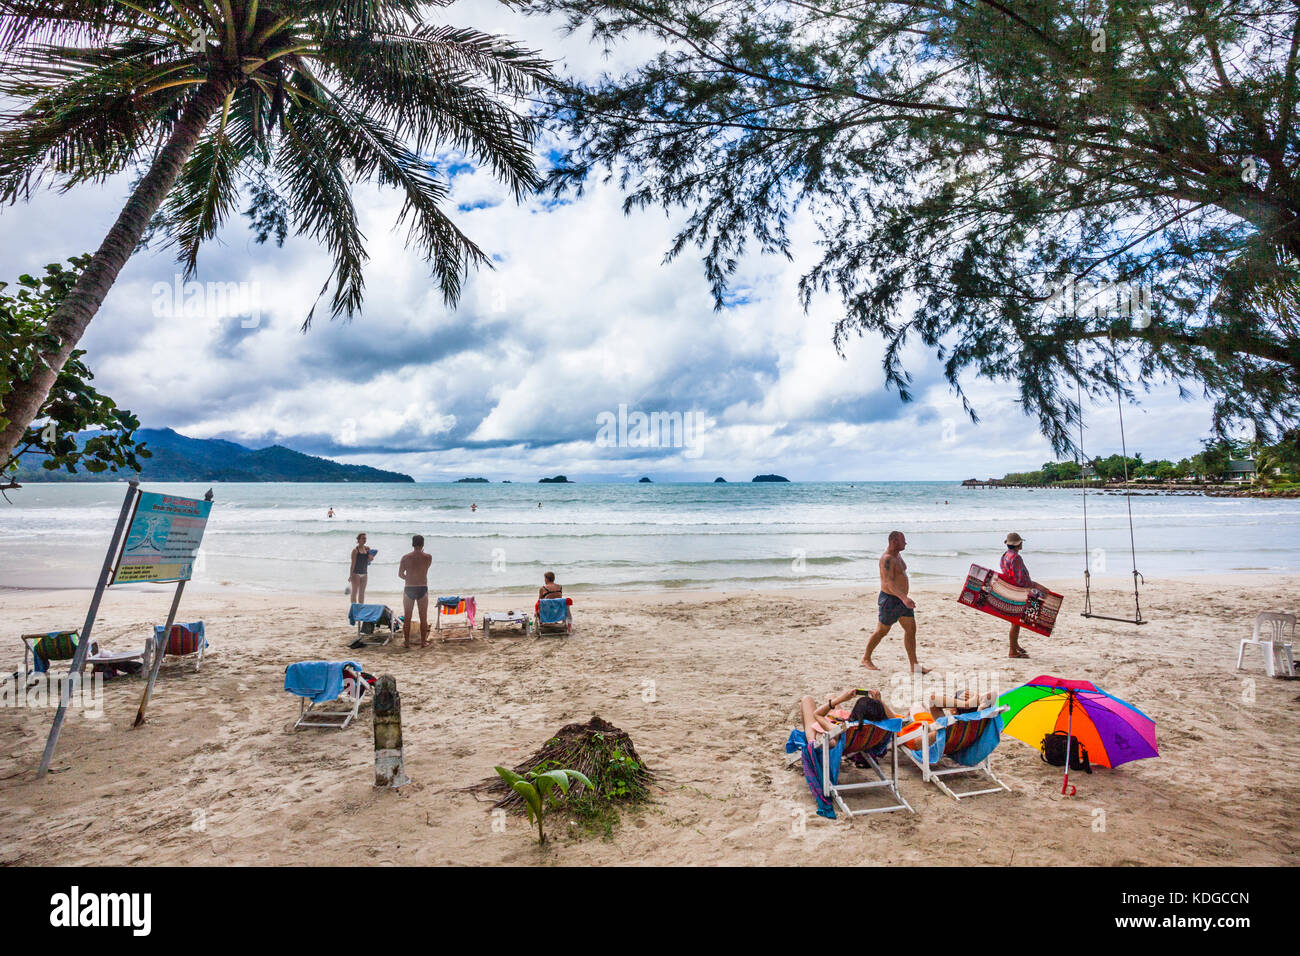 Thailand, Trat Province, Koh Chang Island in the Gulf of Thailand, West Coast, holidaymakers at Ao Klong Phrao Beach Stock Photo